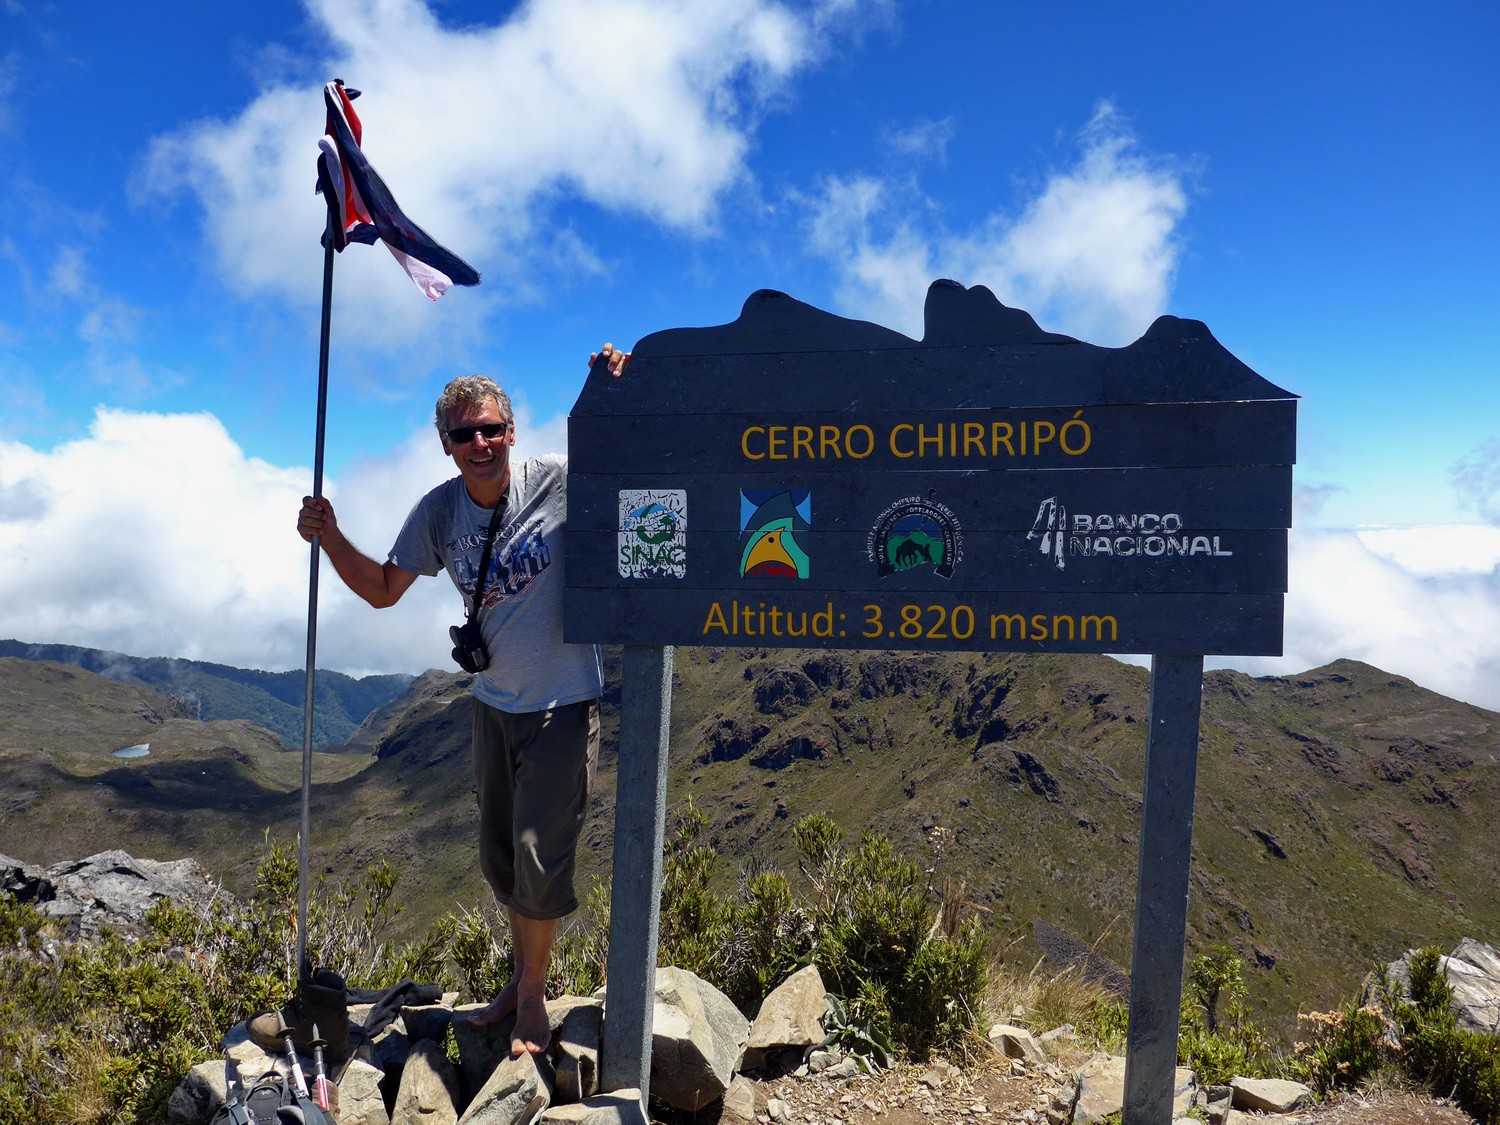 Finally on top of Costa Rica's highest summit after nearly 3000 meters vertical meters and more than 21 kilometers hiking